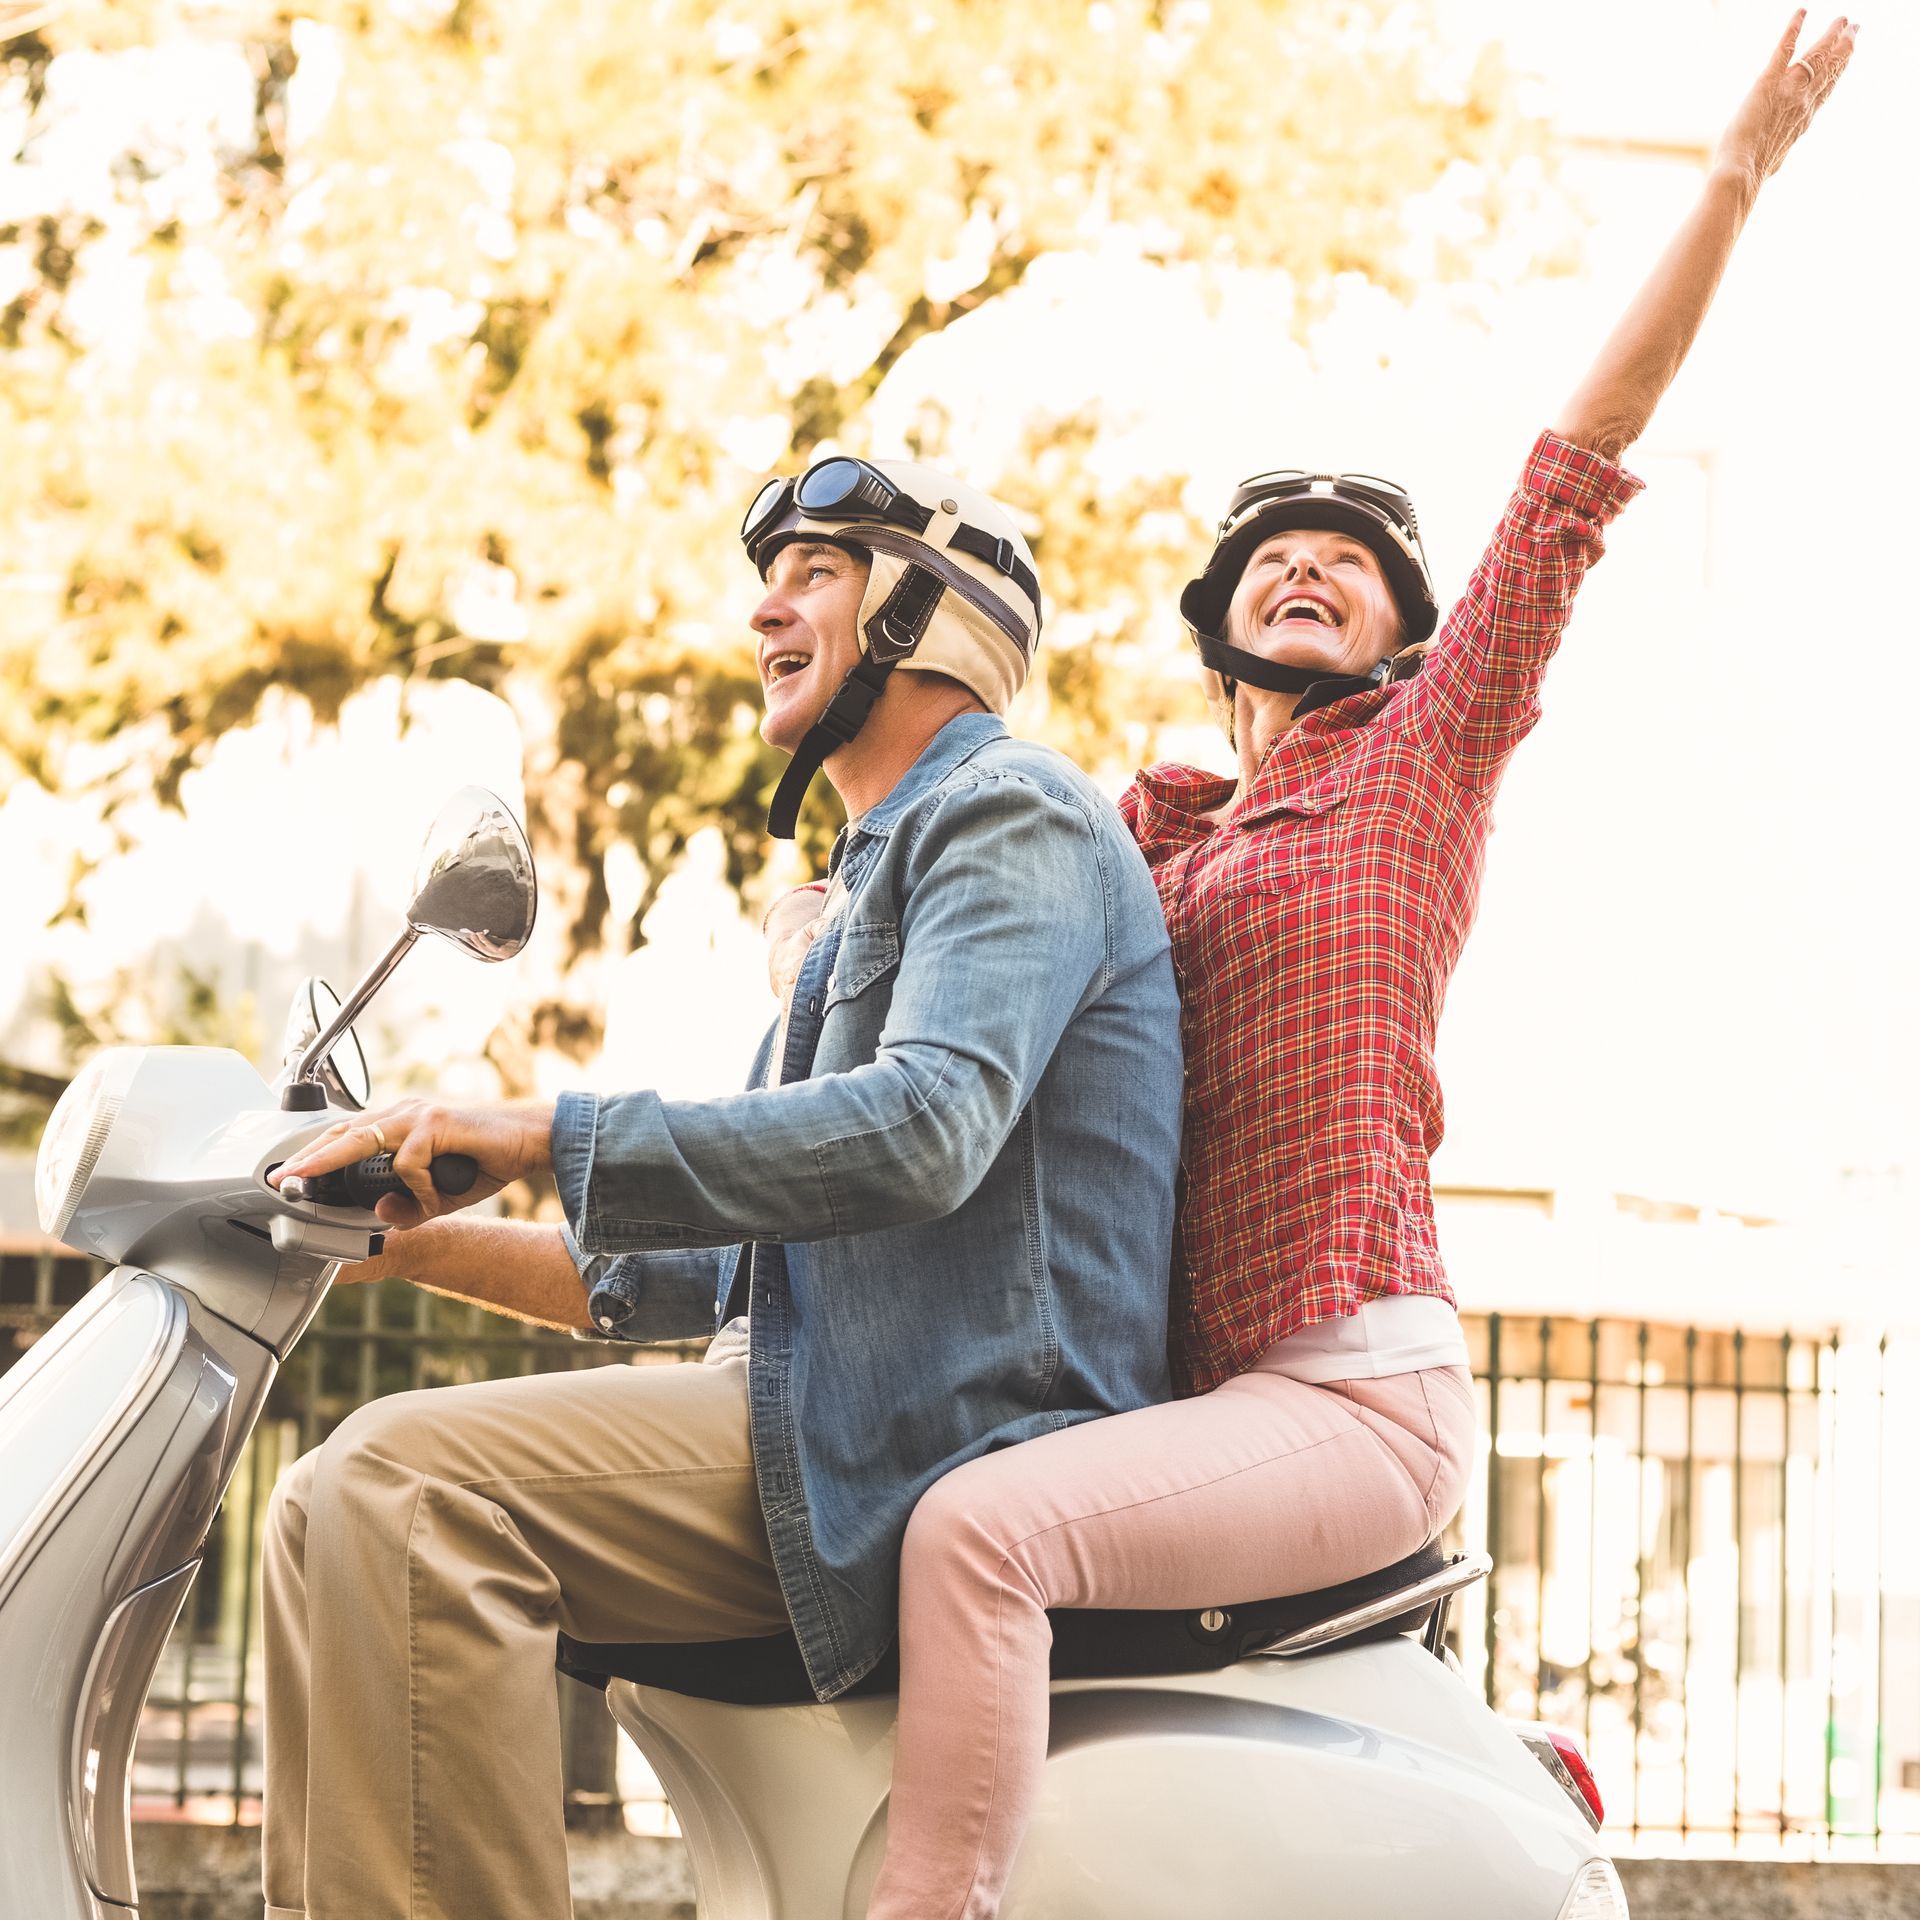 A man and a woman are riding a scooter with their arms in the air.